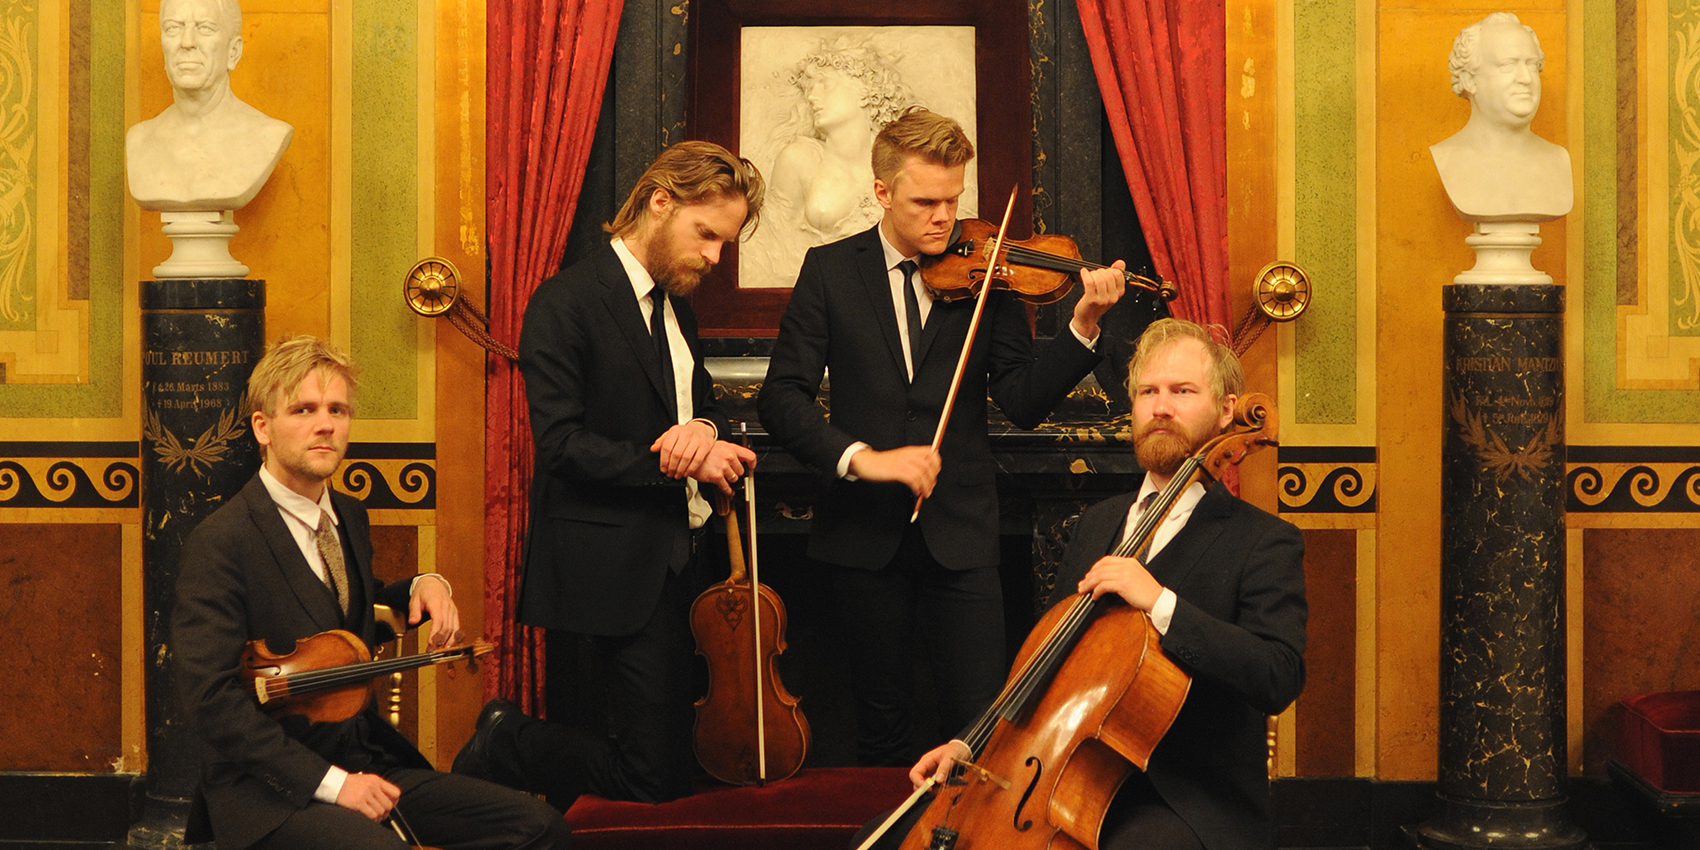 Four musicians holding string instruments in front of an ornate background